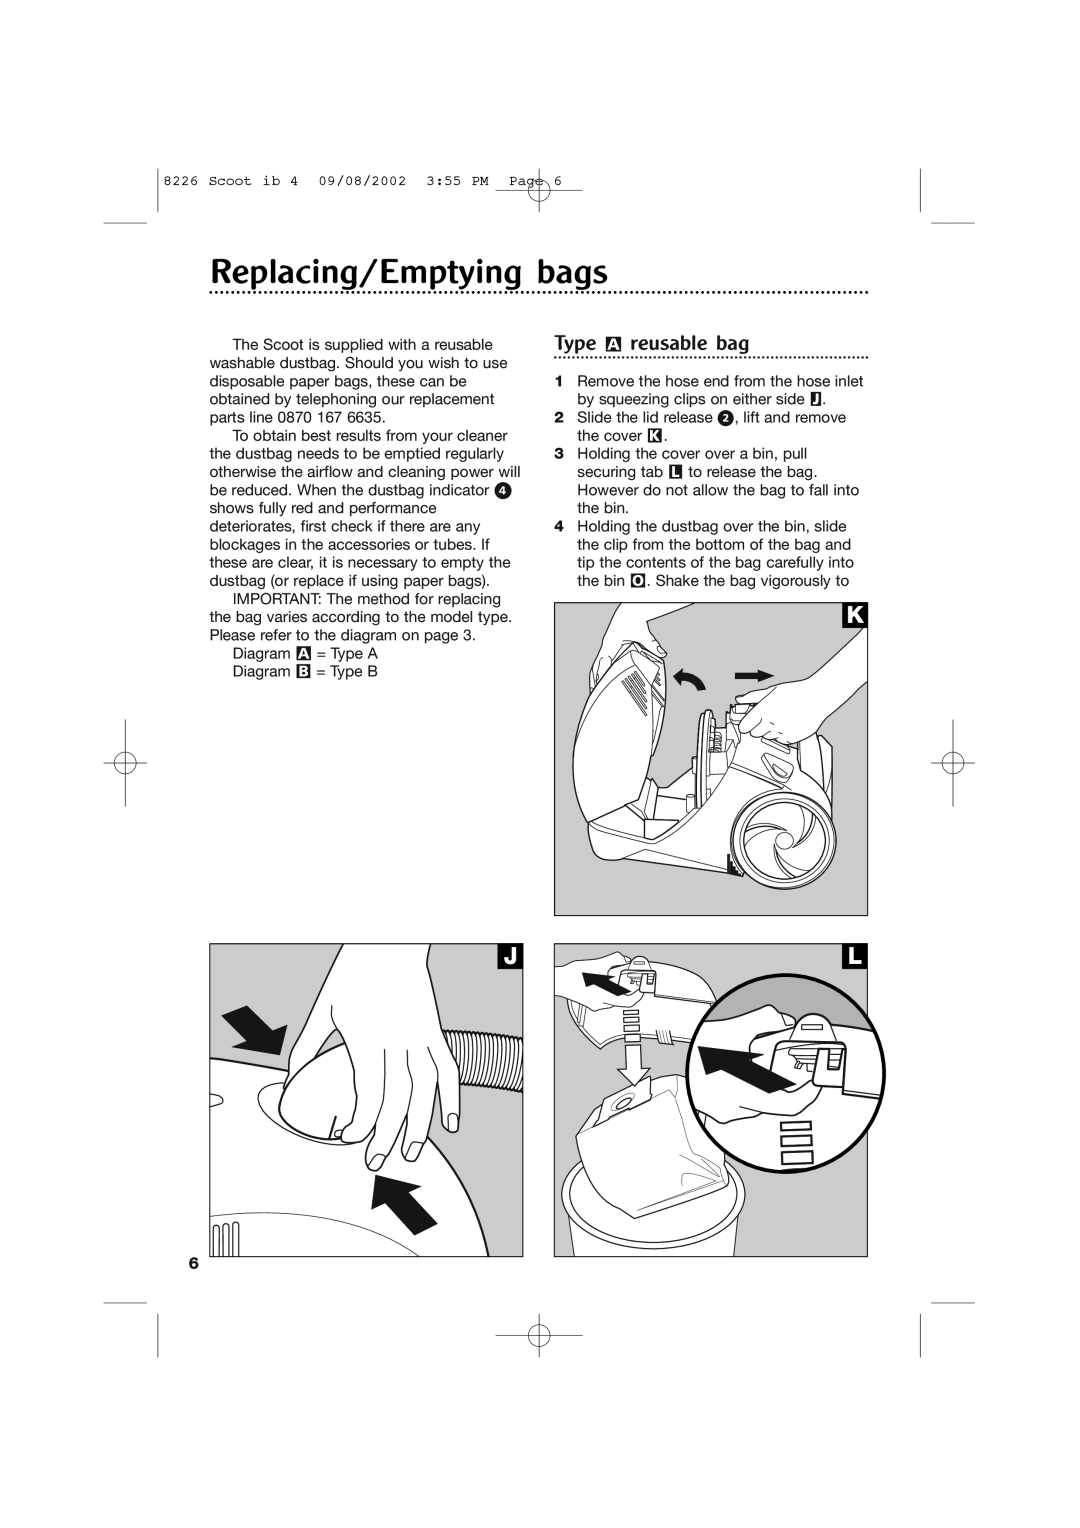 Morphy Richards Scoot cylinder vacuum cleaner manual Replacing/Emptying bags, Type A reusable bag 